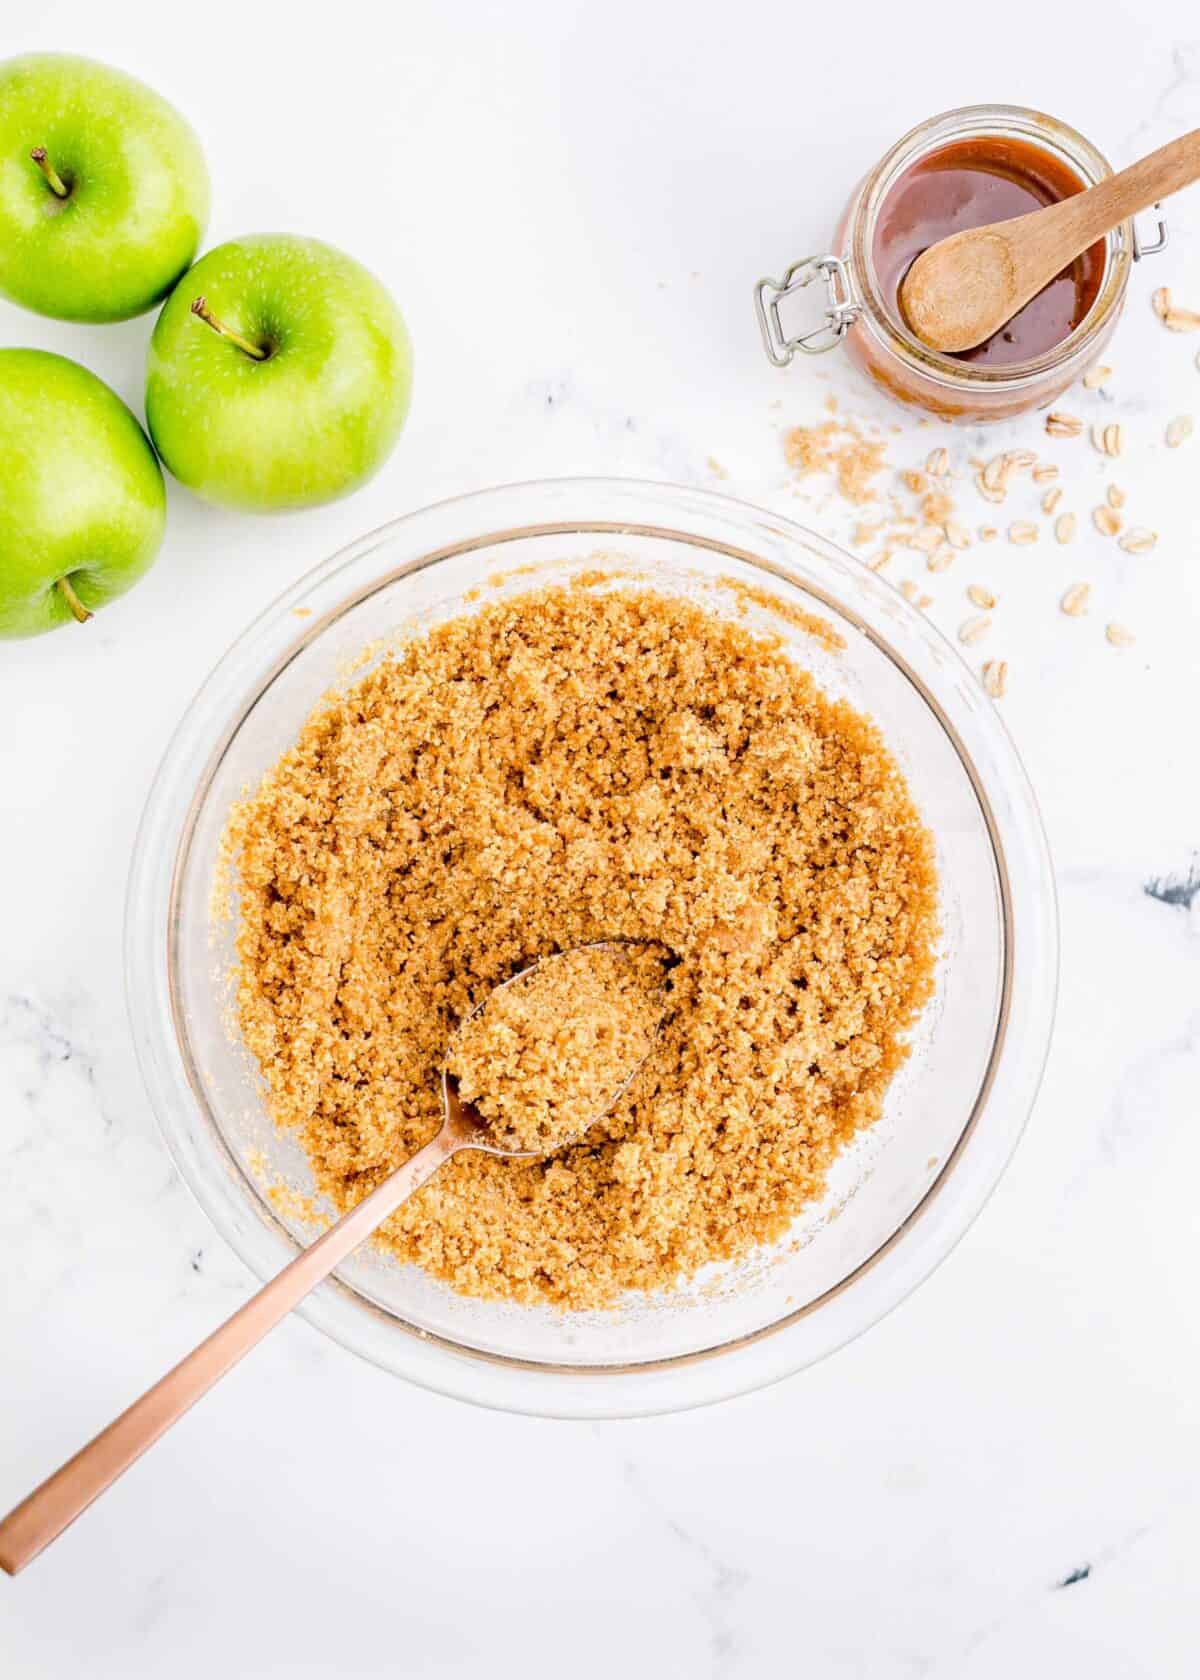 A mixing bowl filled with flour, brown sugar, rolled oats, cinnamon, and butter, with a mixing spoon in it, and three apples to the side